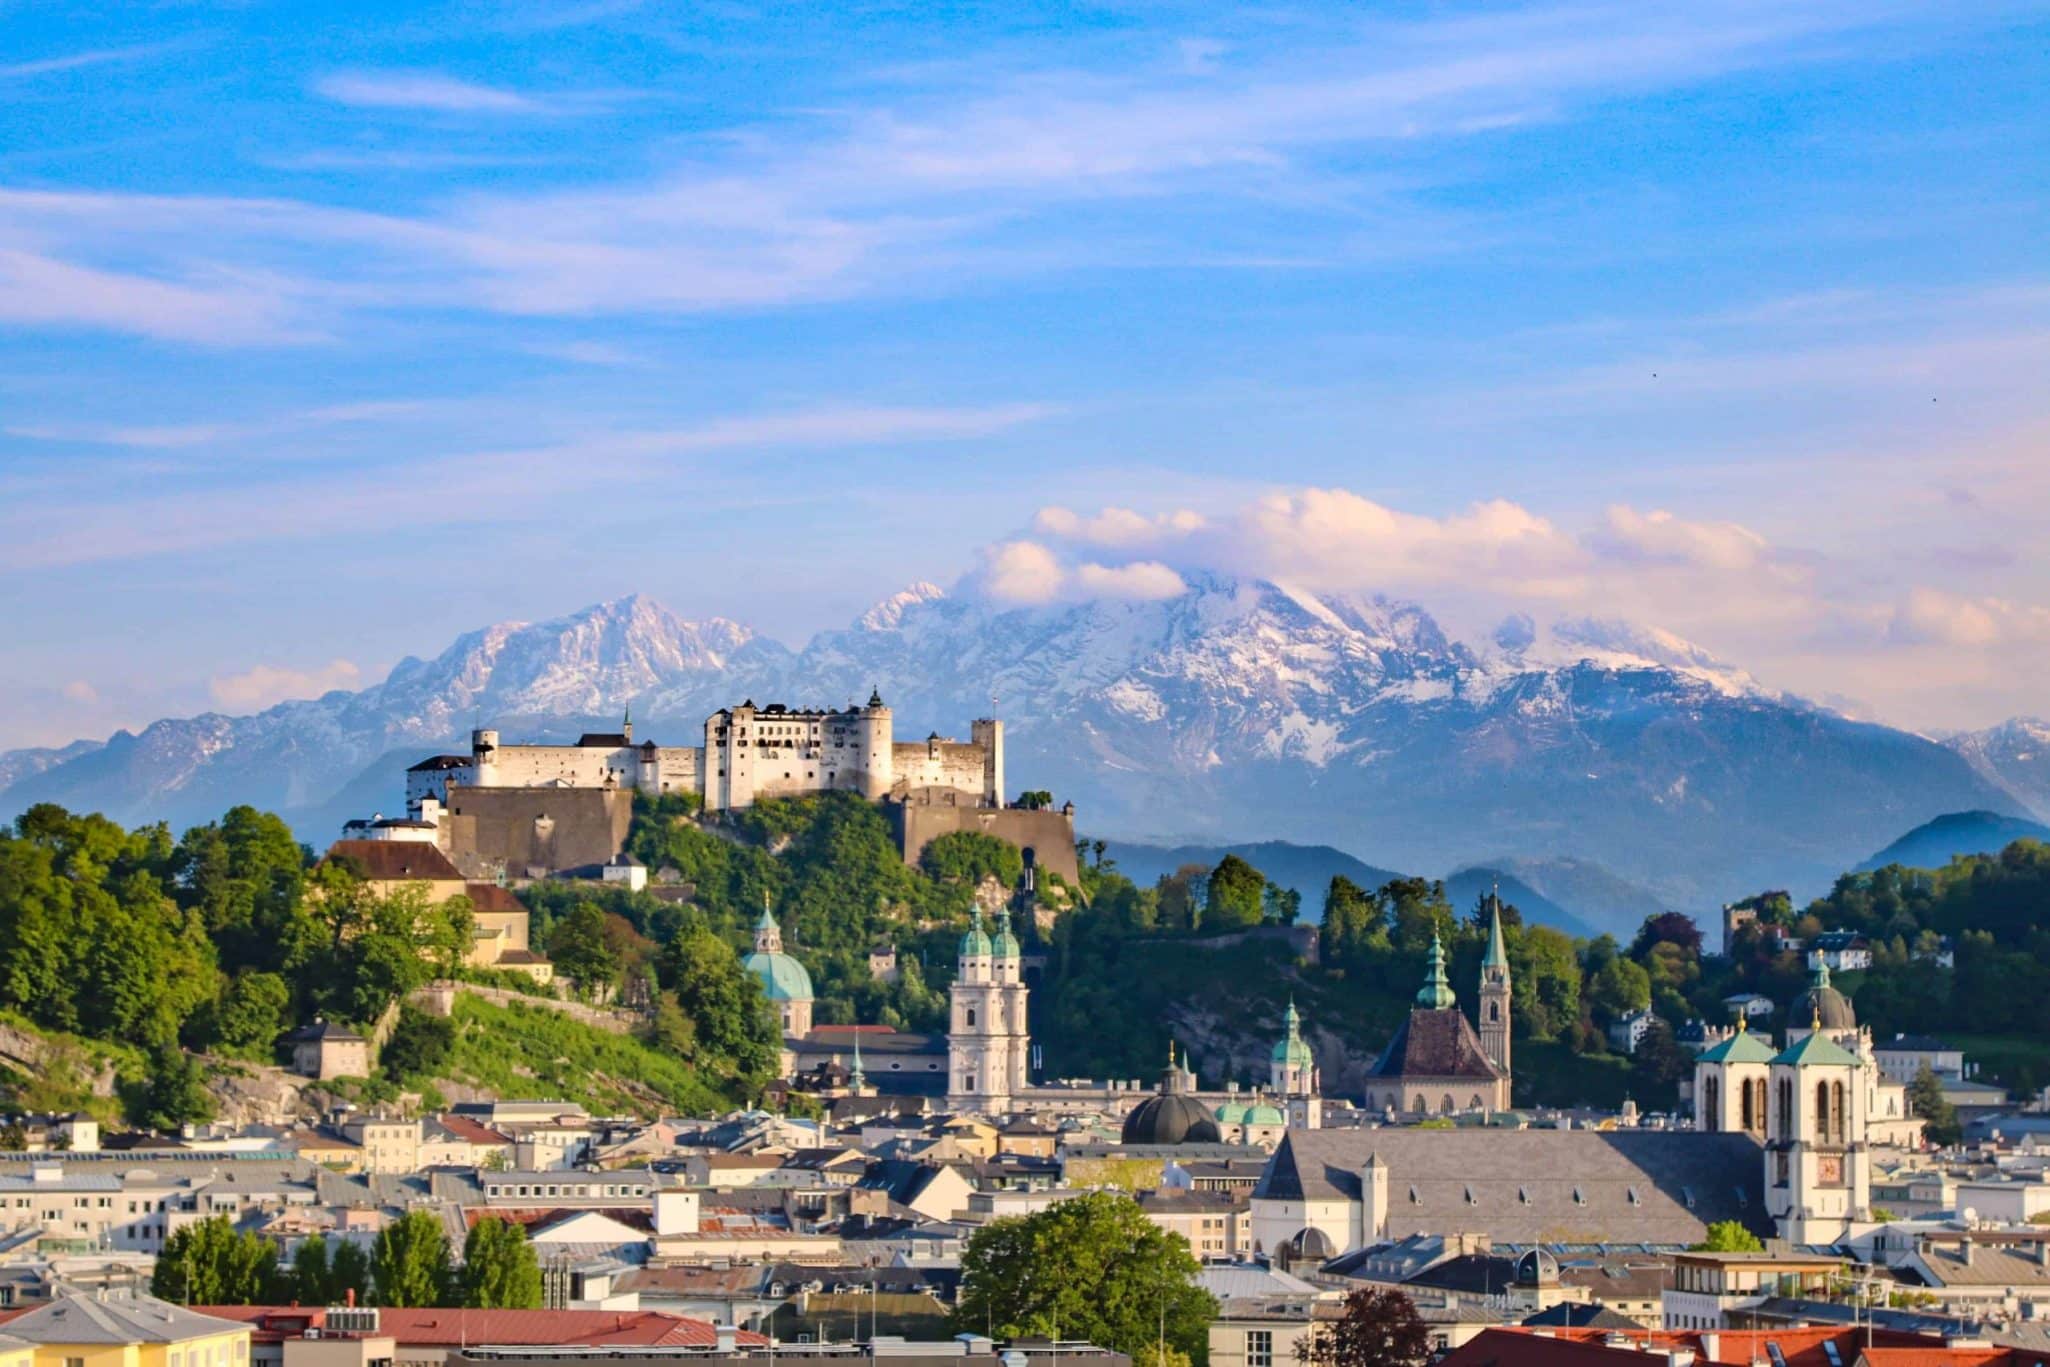 Review: Austria Trend Hotel has the best view in Salzburg